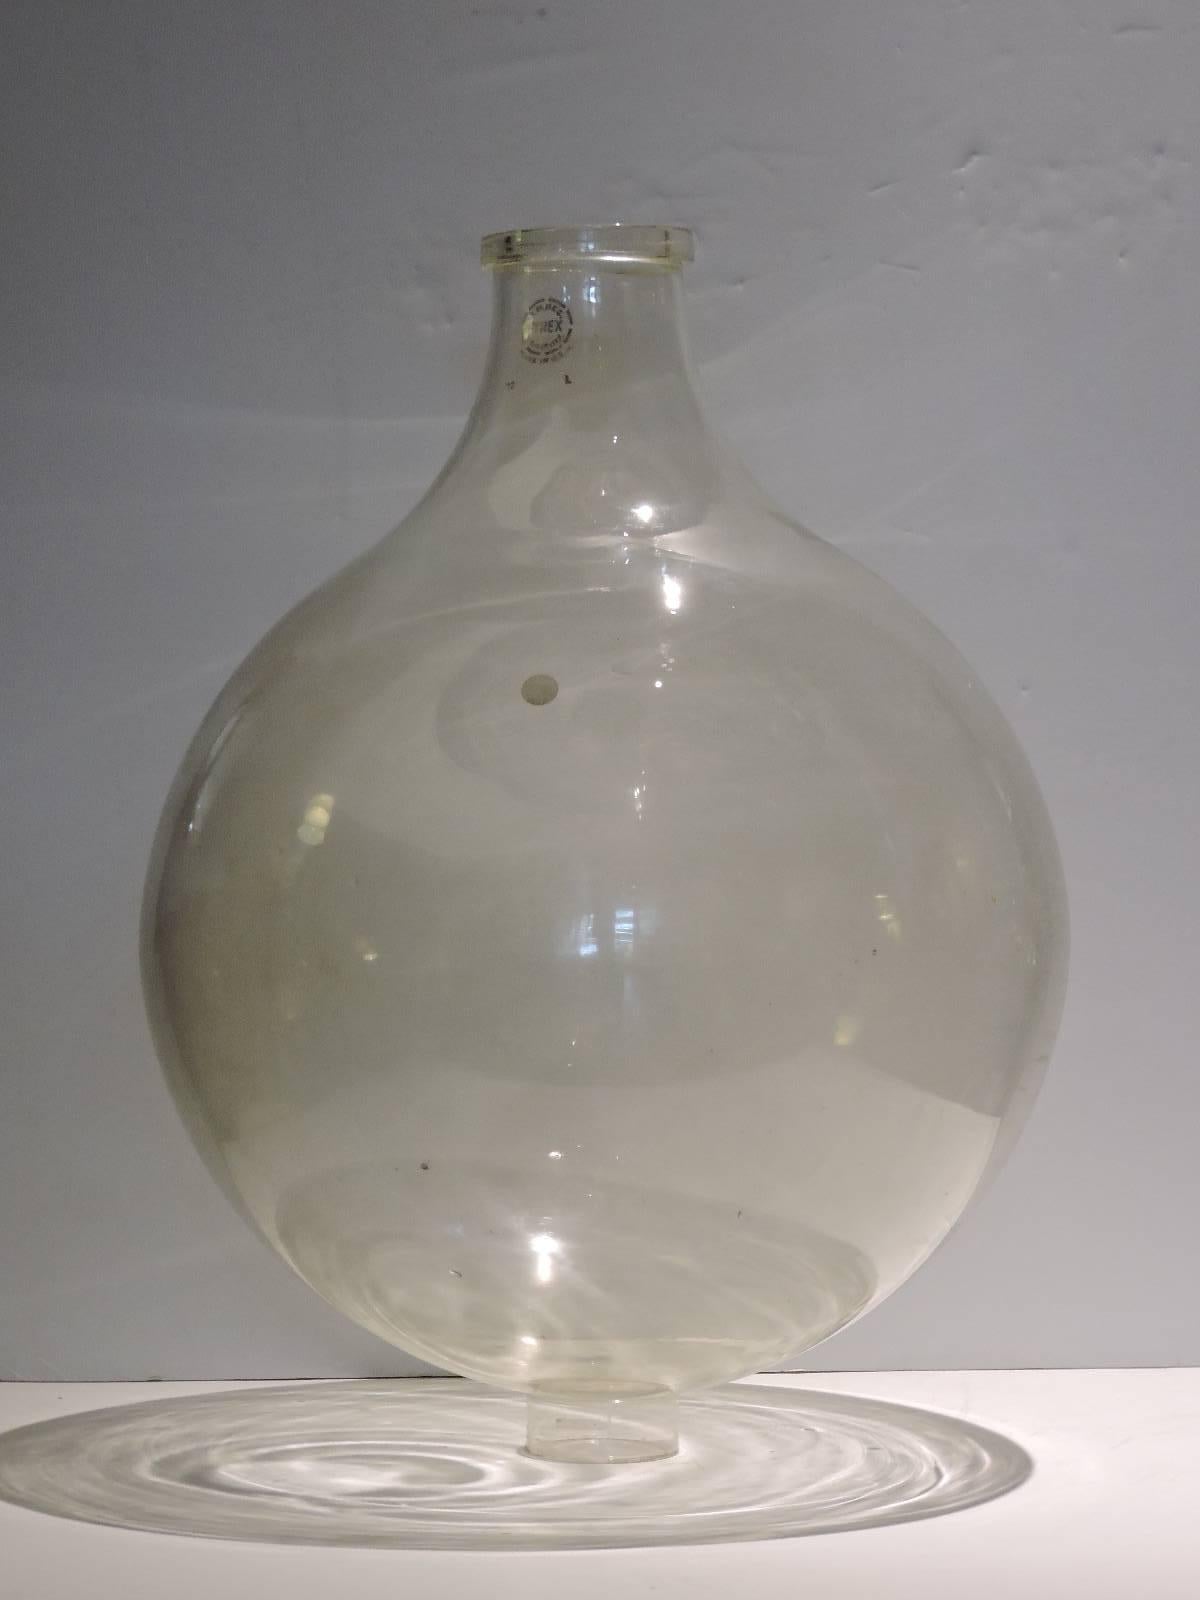 American Massive Industrial Old Pyrex Laboratory Carboy Bottle